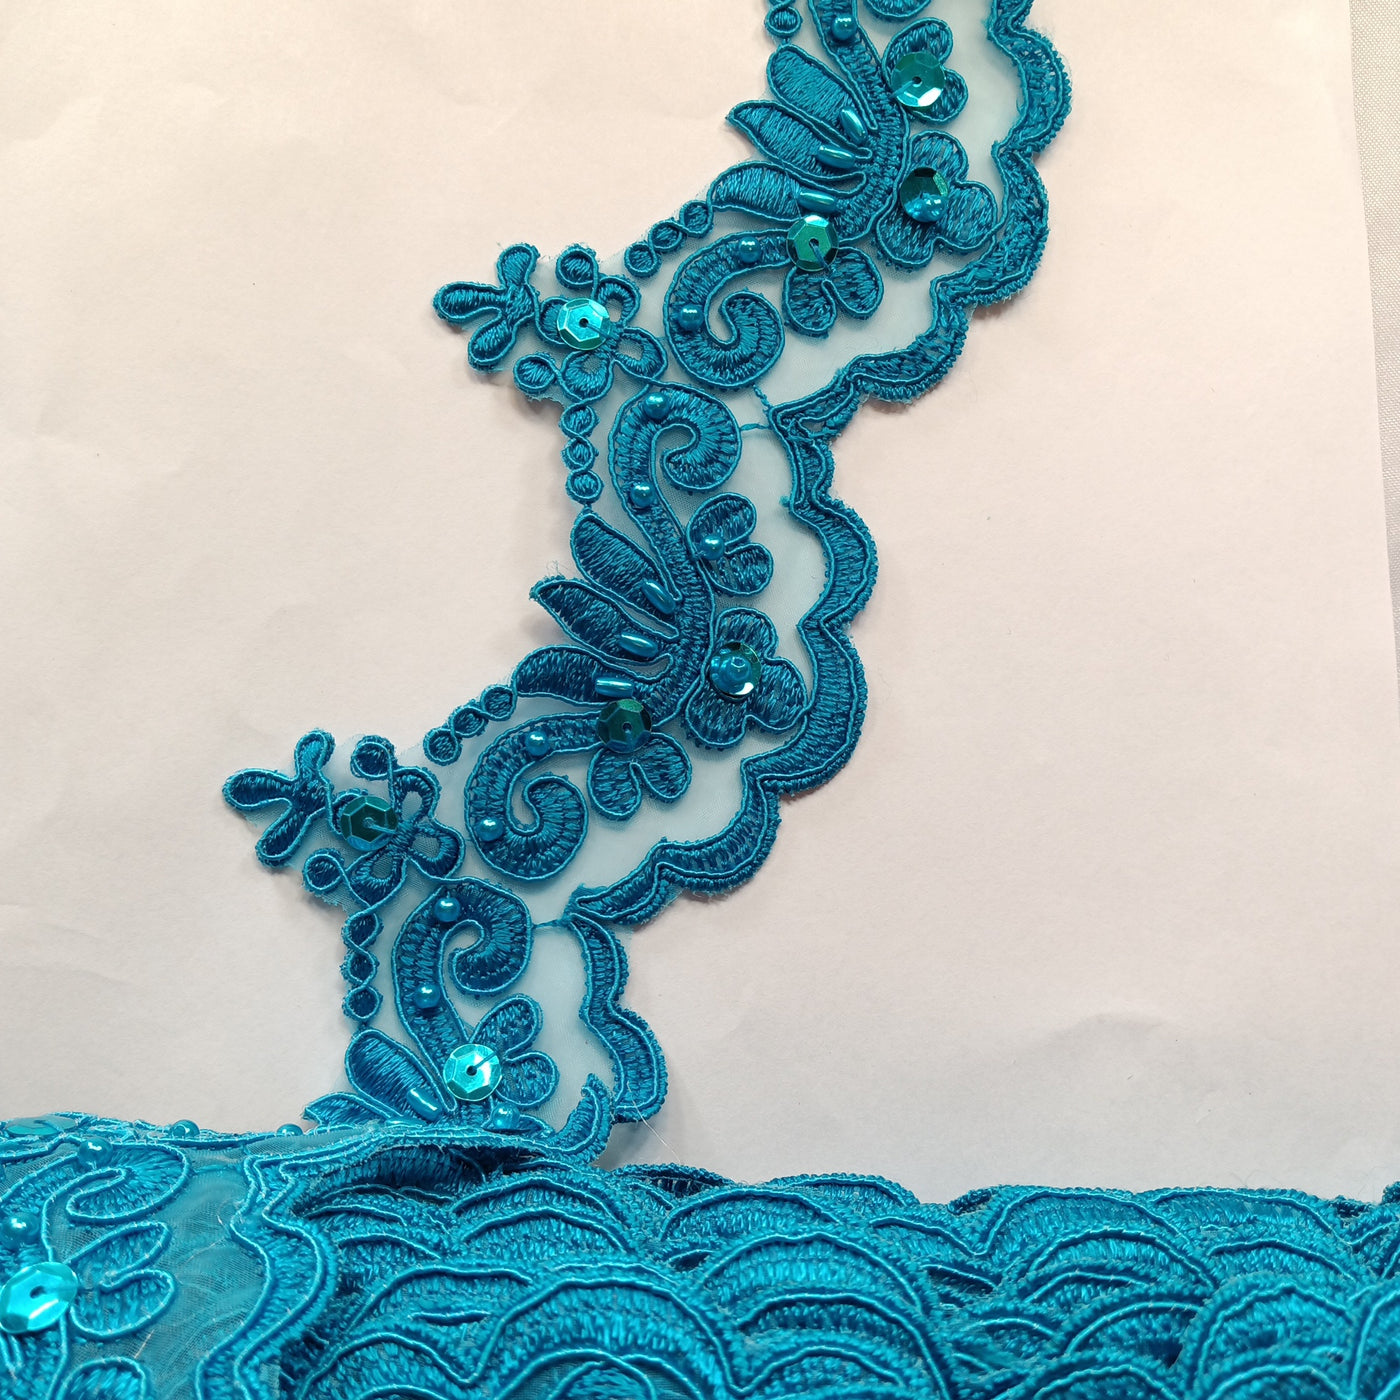 Corded, Beaded & Embroidered Turquoise Trimming. Lace Usa